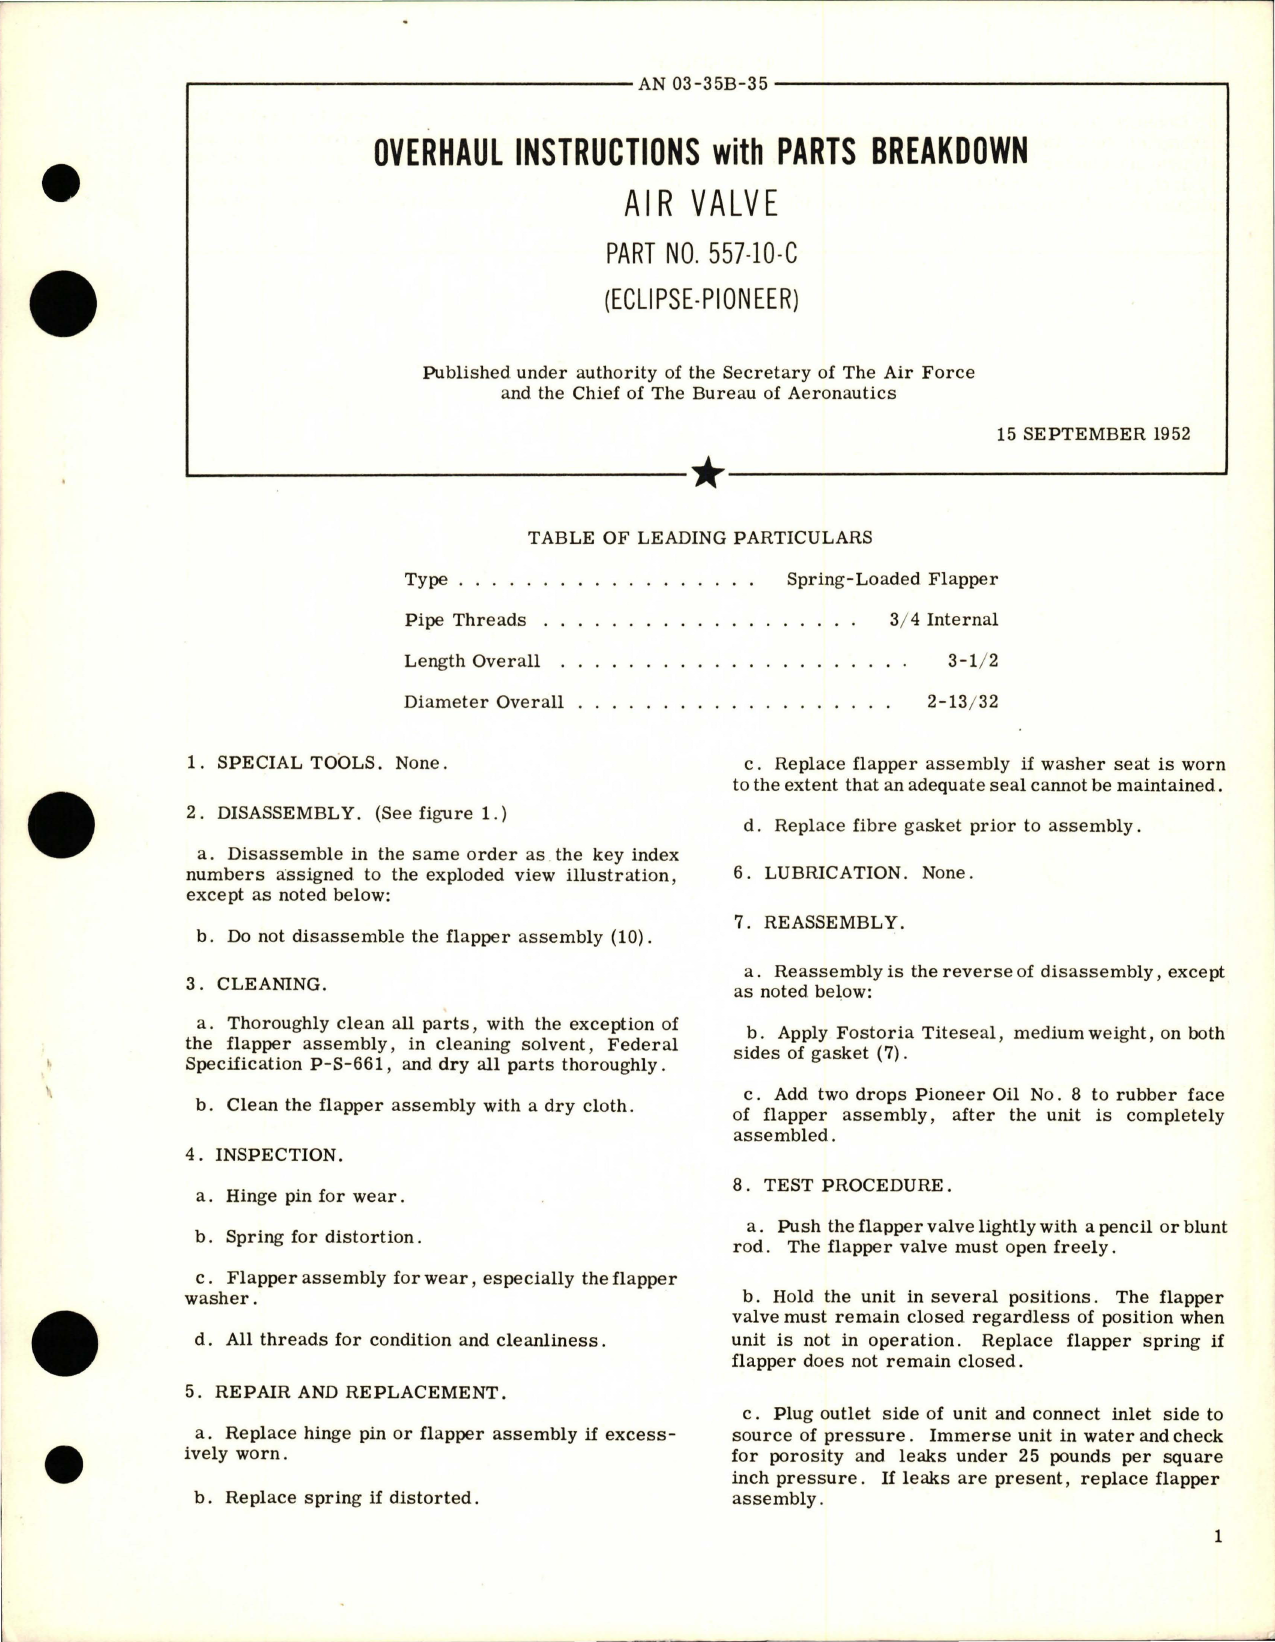 Sample page 1 from AirCorps Library document: Overhaul Instructions with Parts Breakdown for Air Valve - Part 557-10-C 